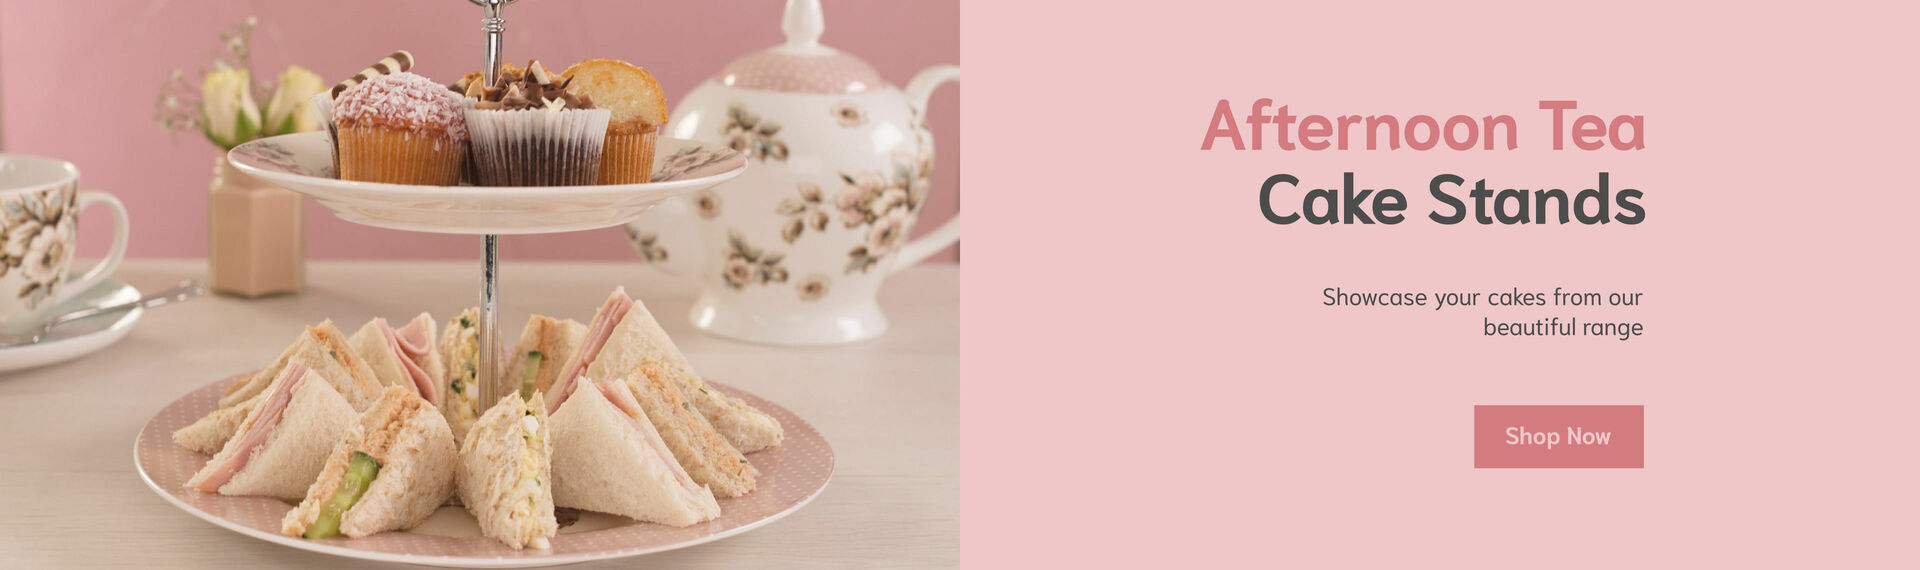 Afternoon Tea Cake Stands